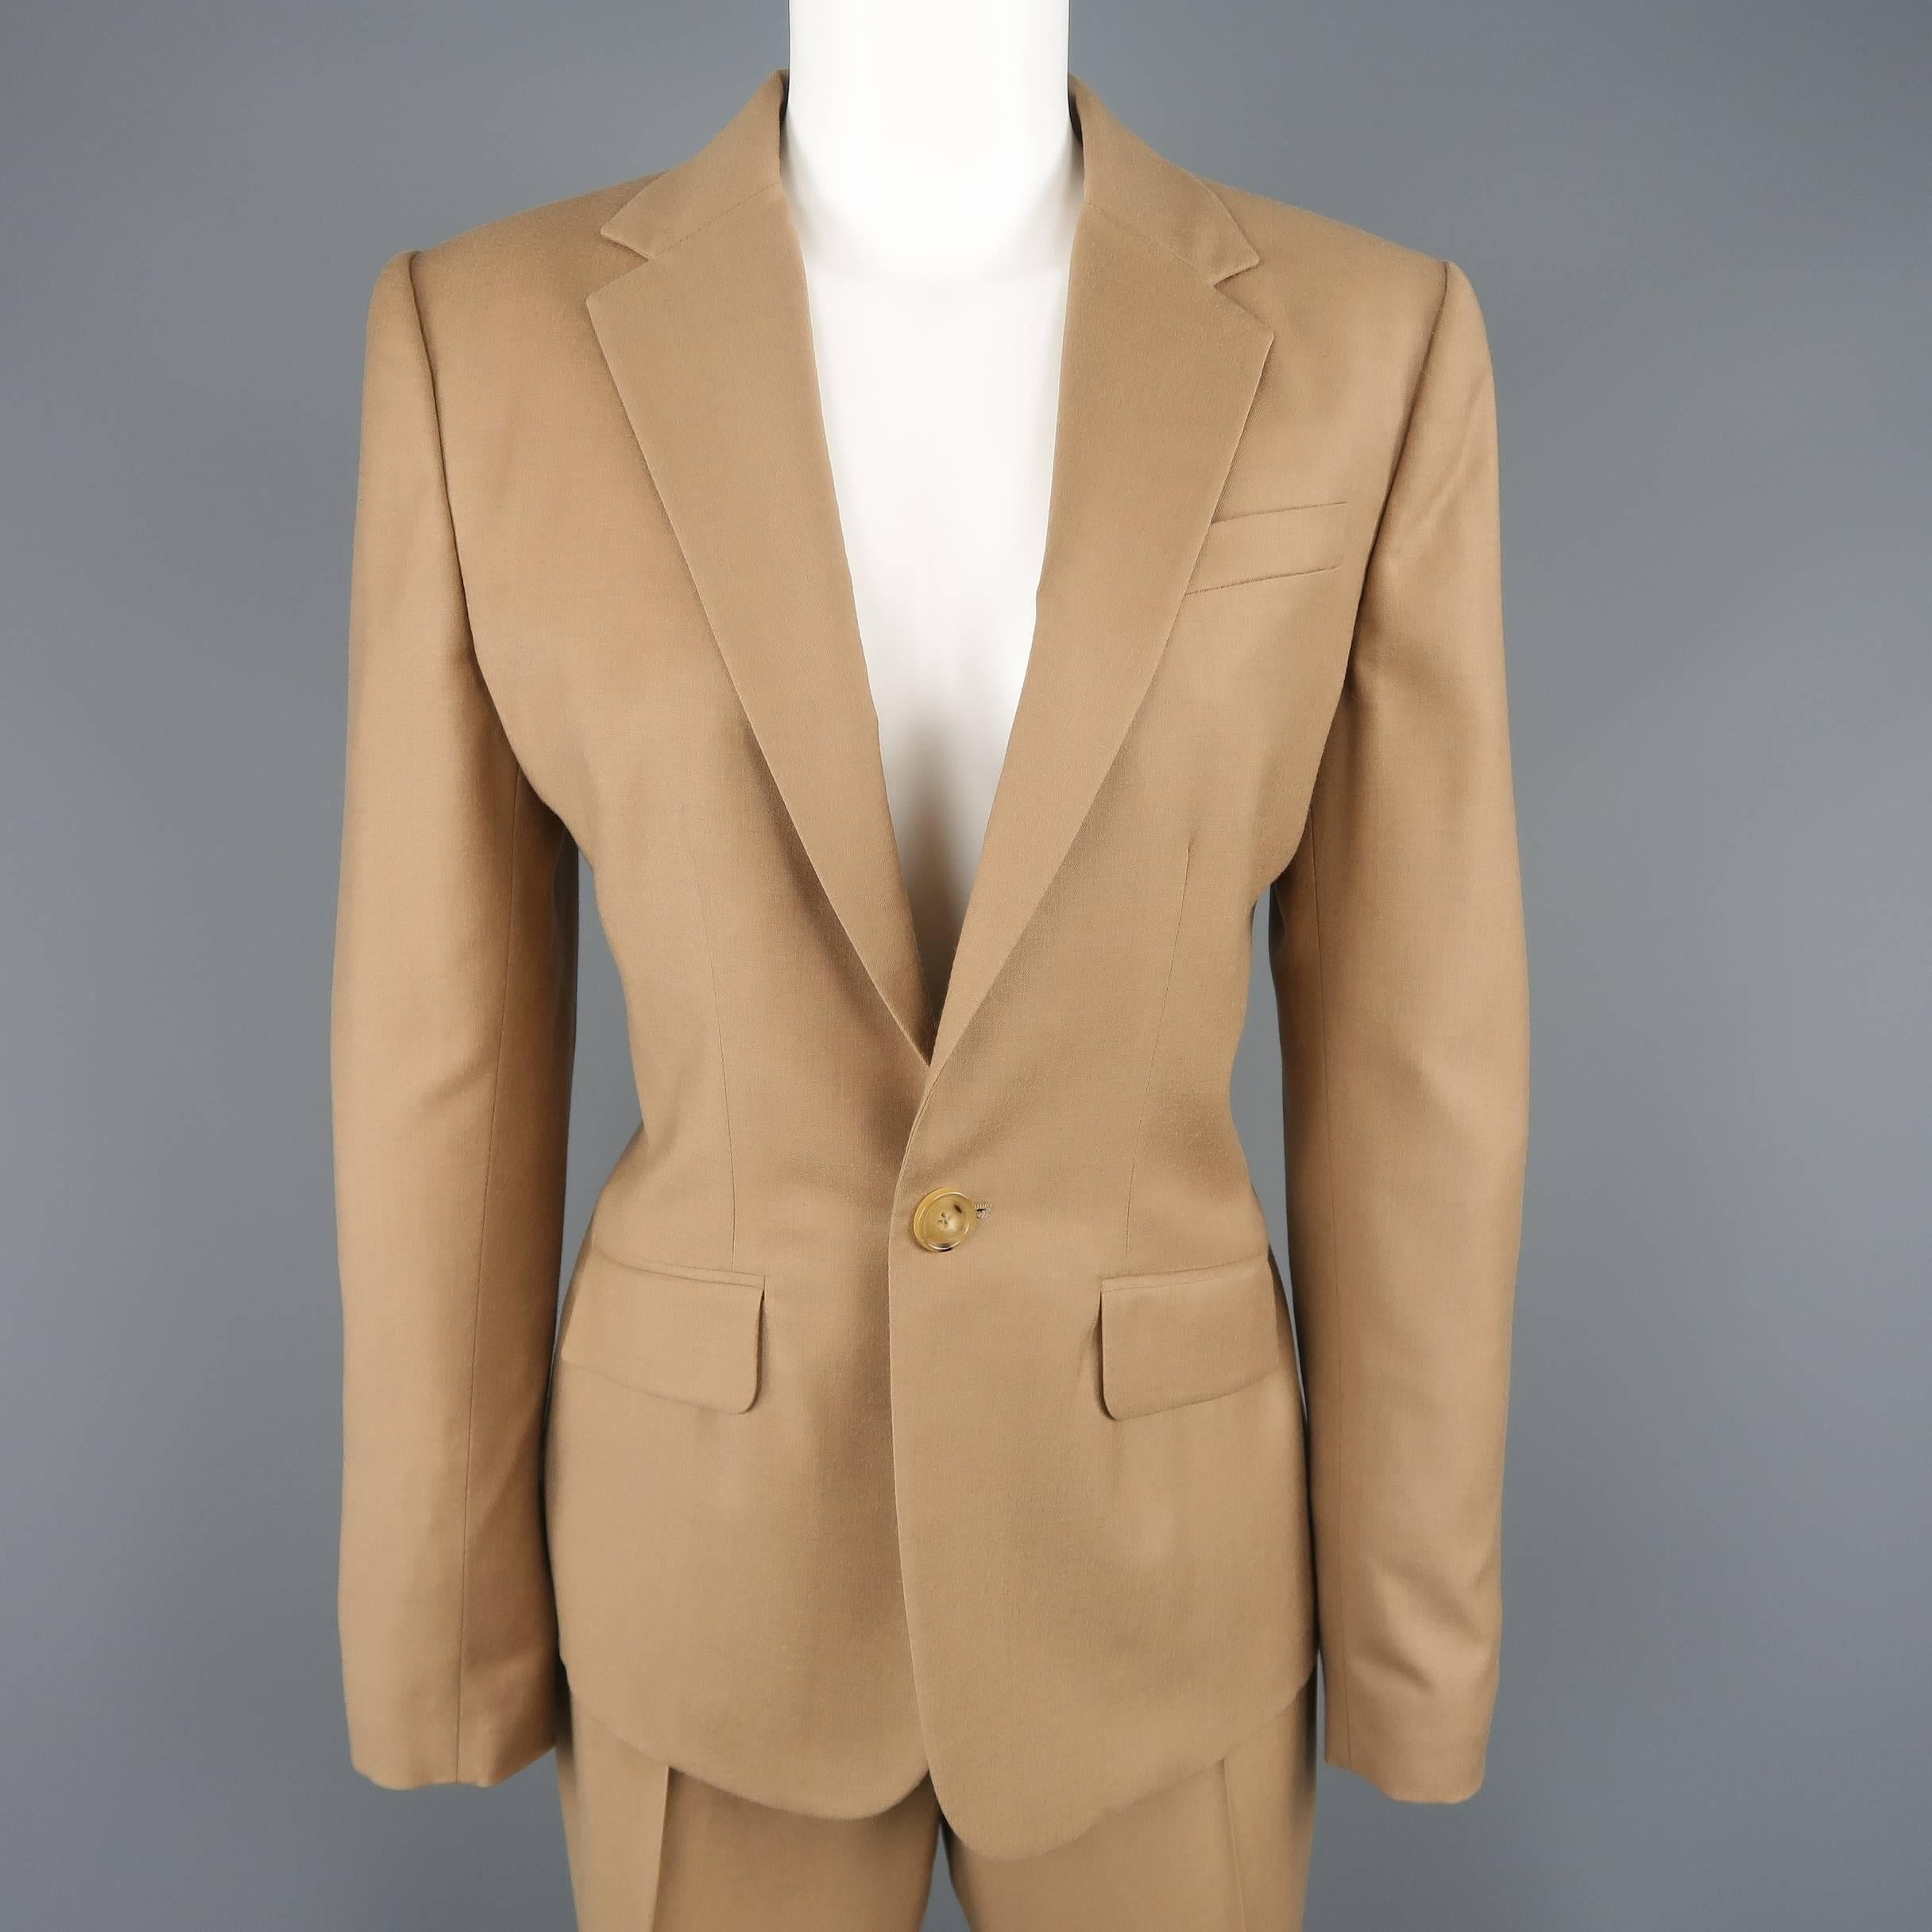 Ralph Lauren Collection suit comes in camel soft wool and includes a single breasted, one button, notch lapel jacket with matching flat front pants. Made in Italy.
 
Excellent Pre-Owned Condition.
Marked: 8
 
Measurements:
 
-Jacket
Shoulder: 16